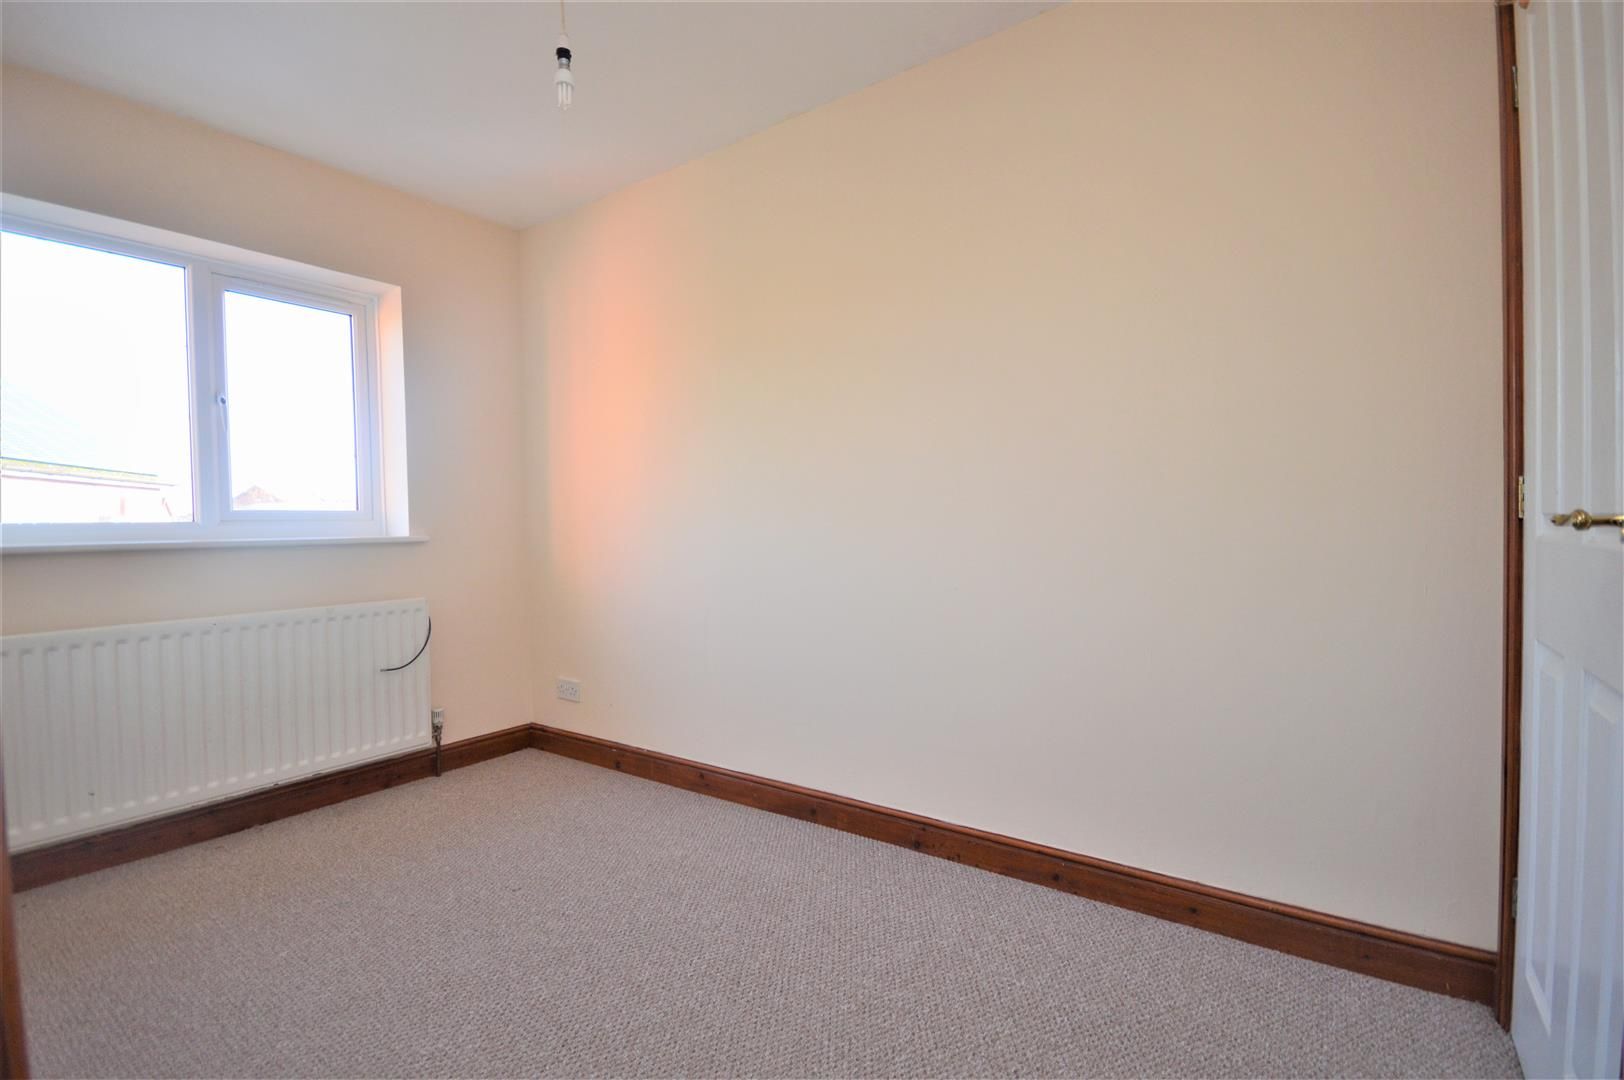 2 bed terraced for sale in Lower Bullingham  - Property Image 7